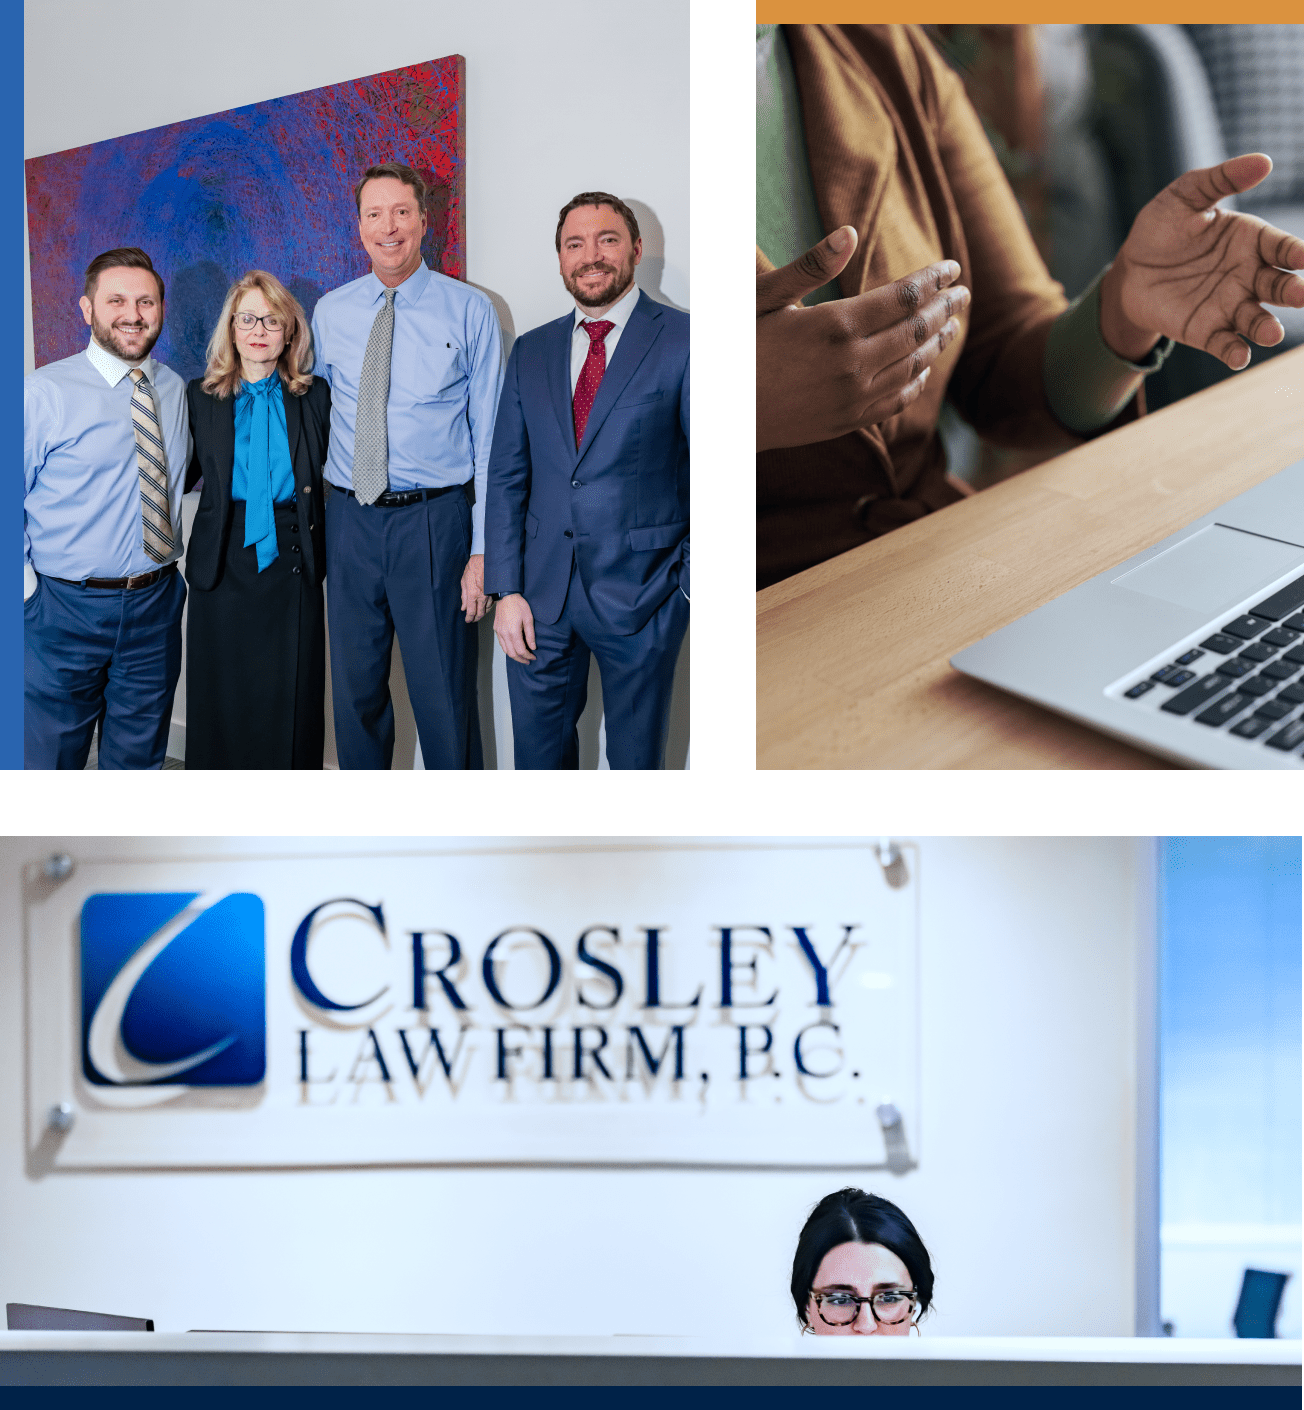 Collage: team portrait, gesturing in meeting, law firm sign.